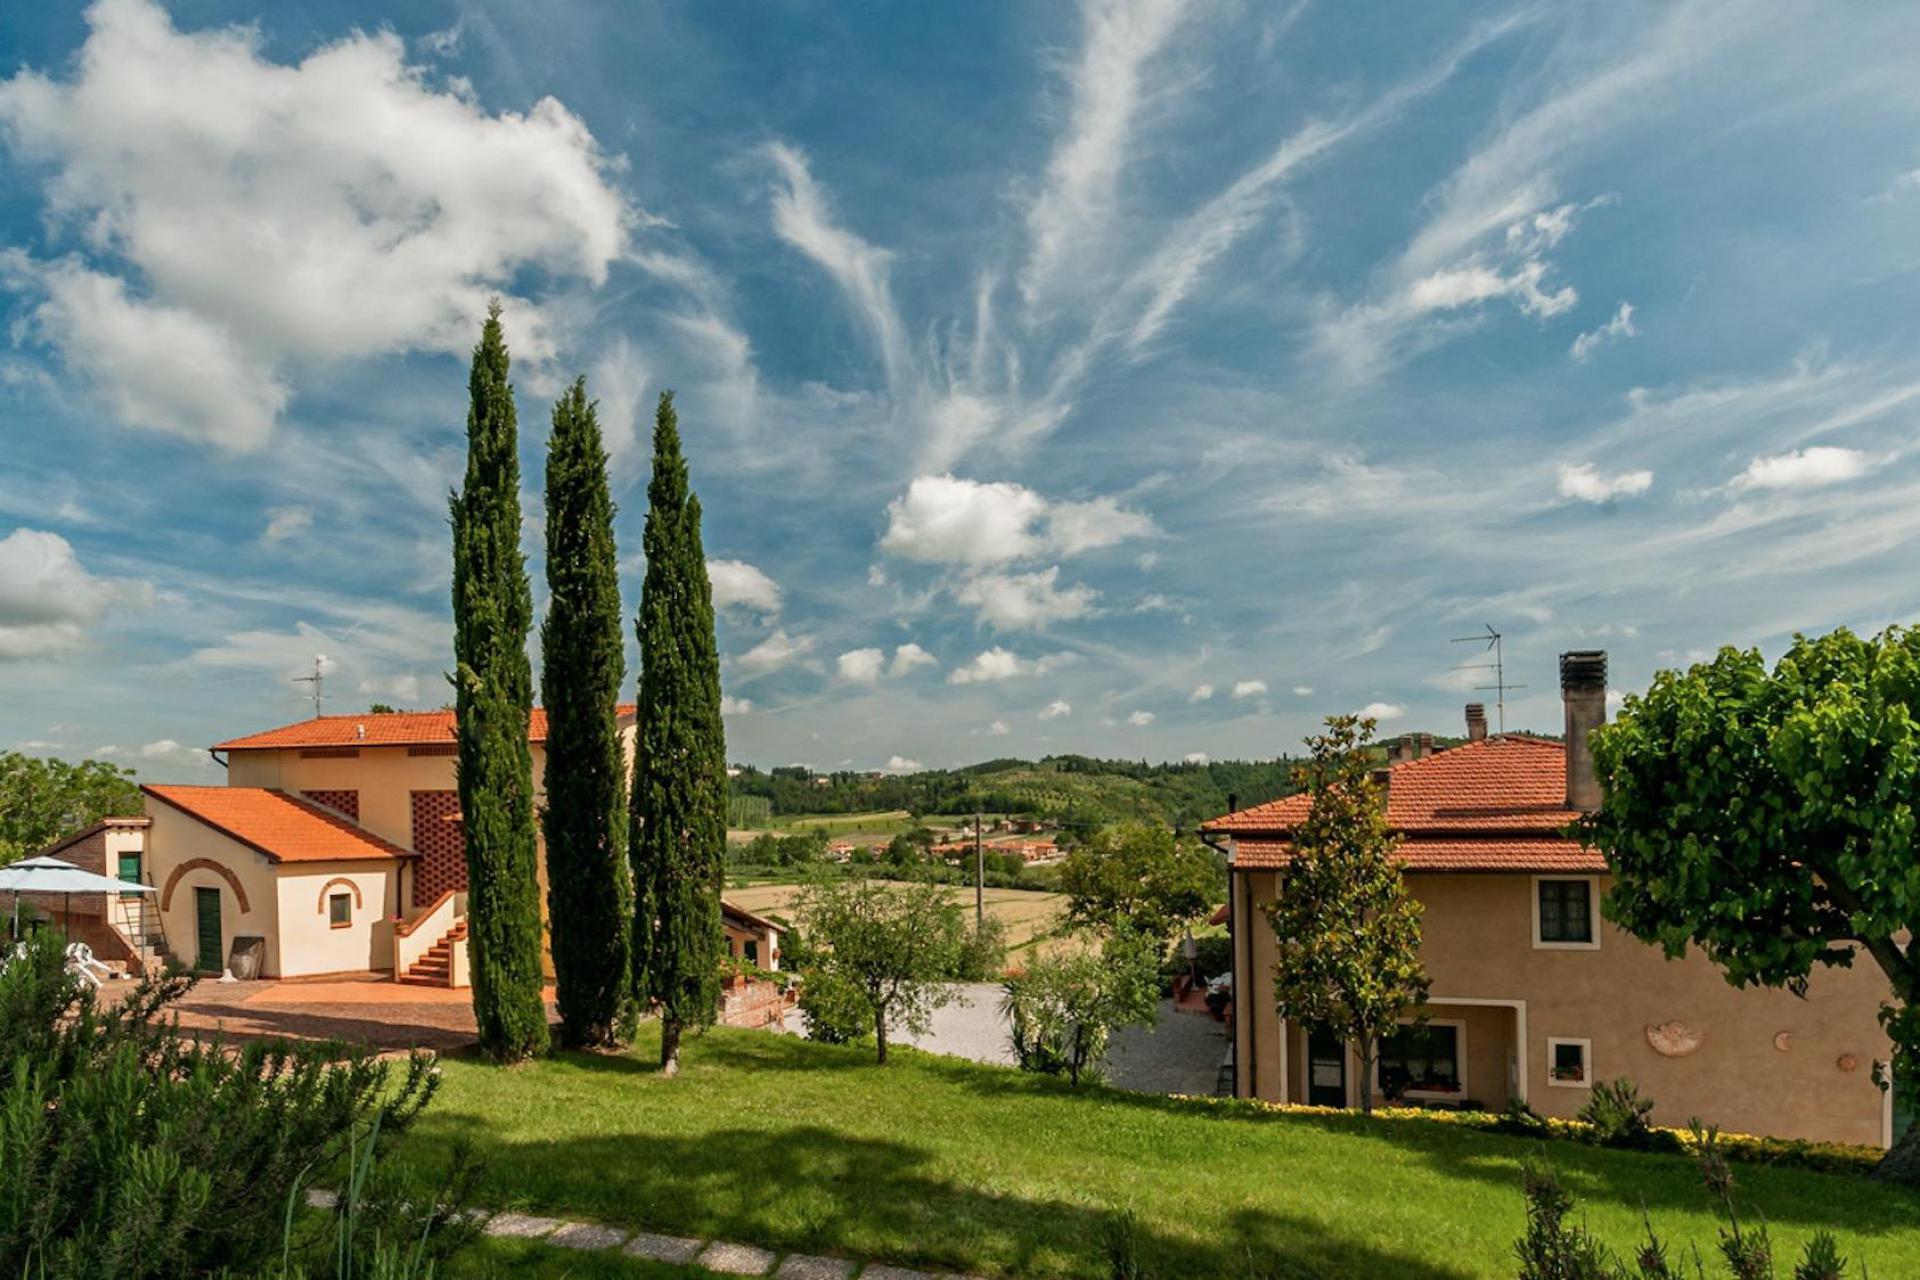 Cozy agriturismo with family apartments